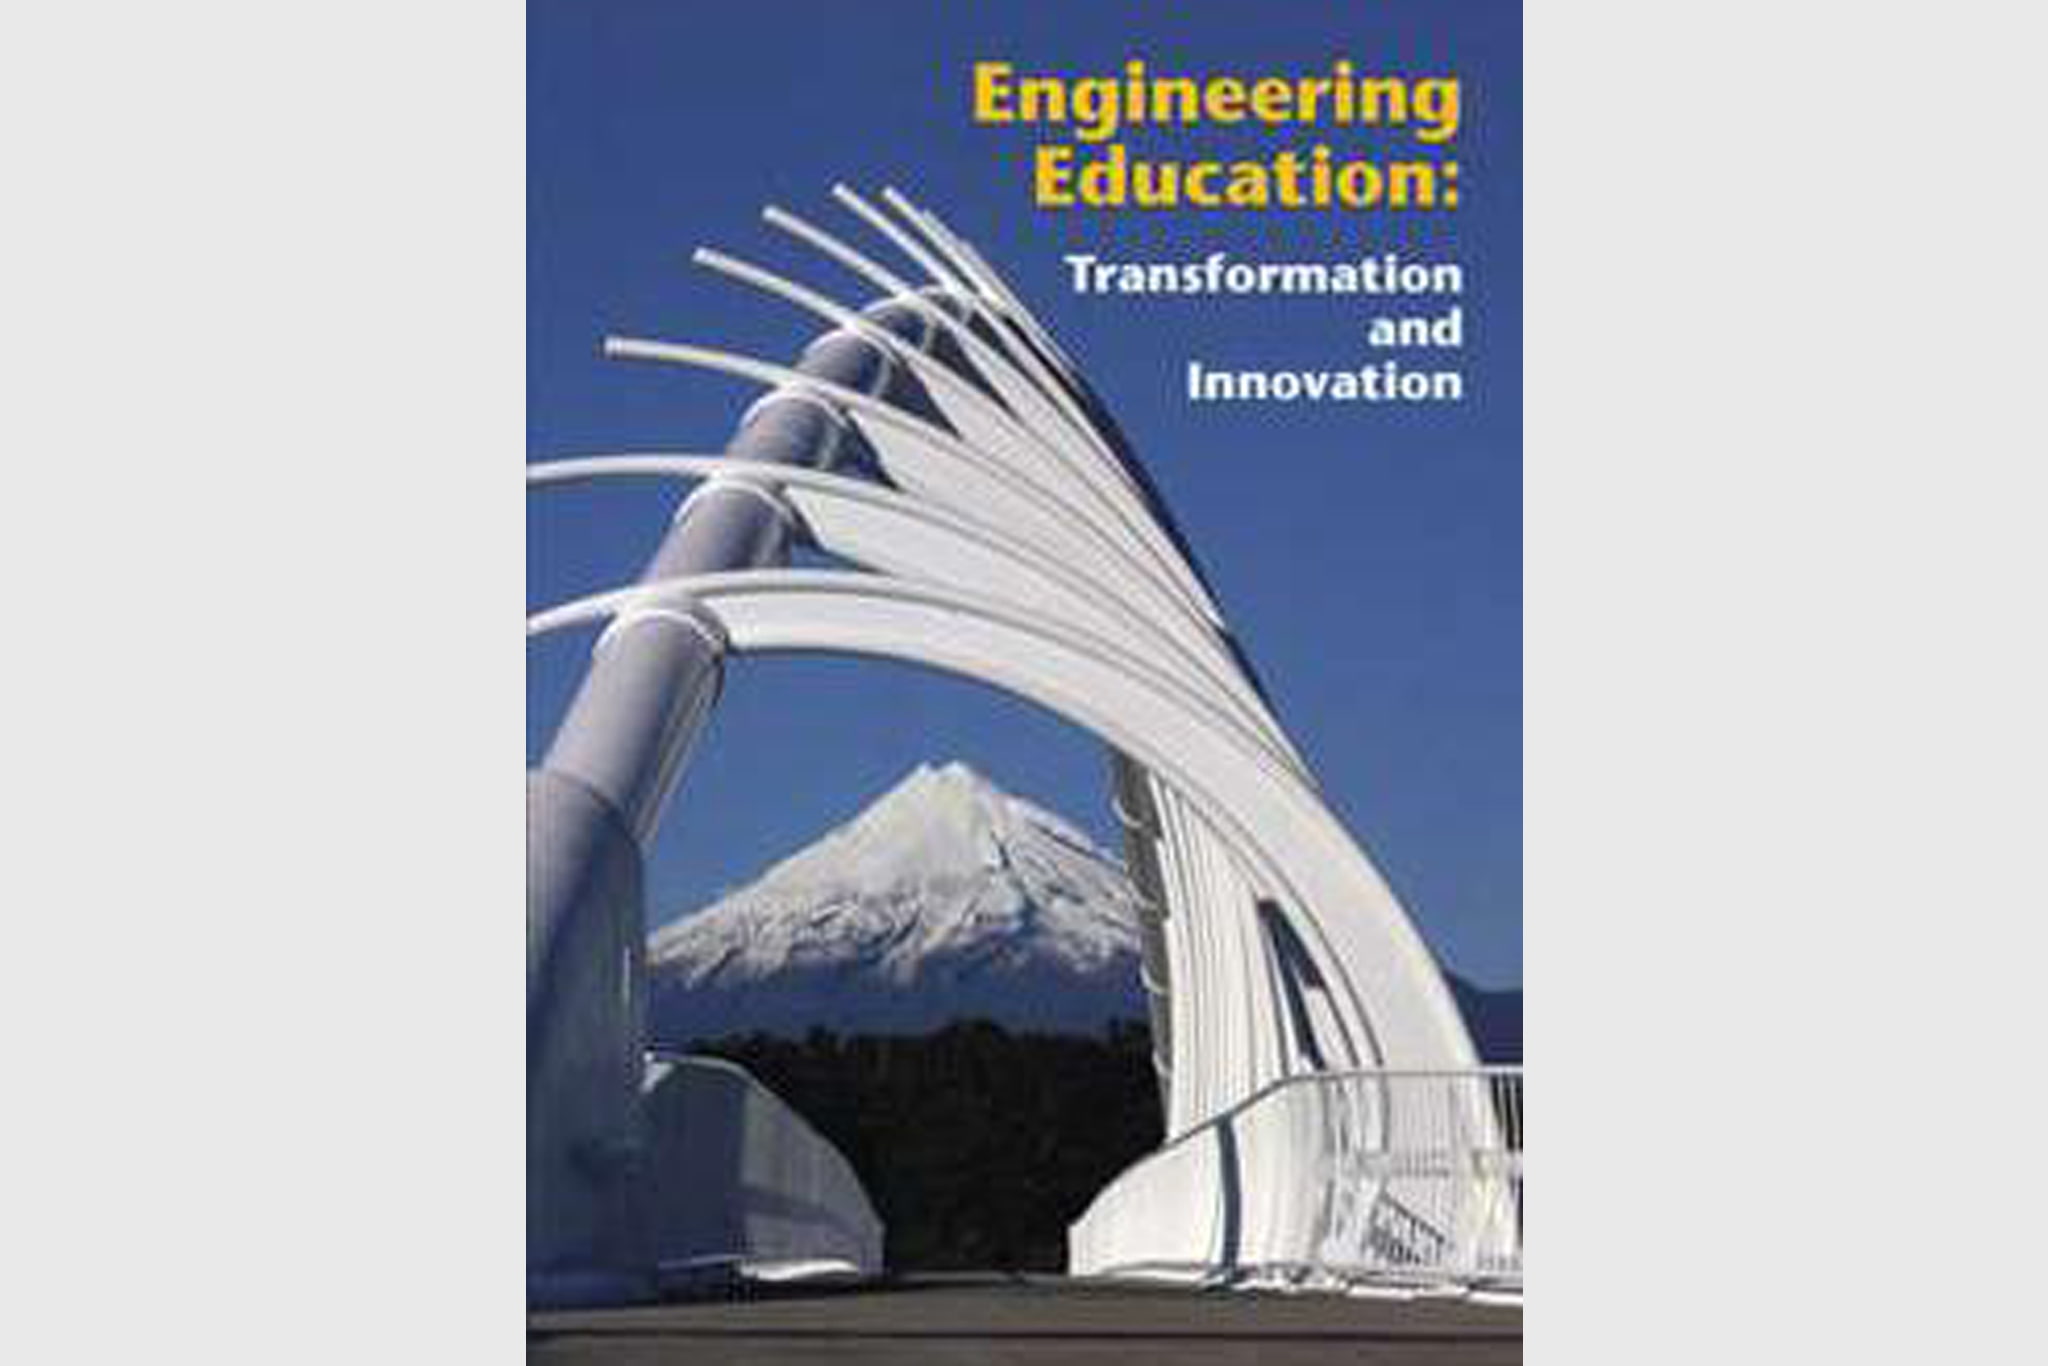 Engineering education book cover